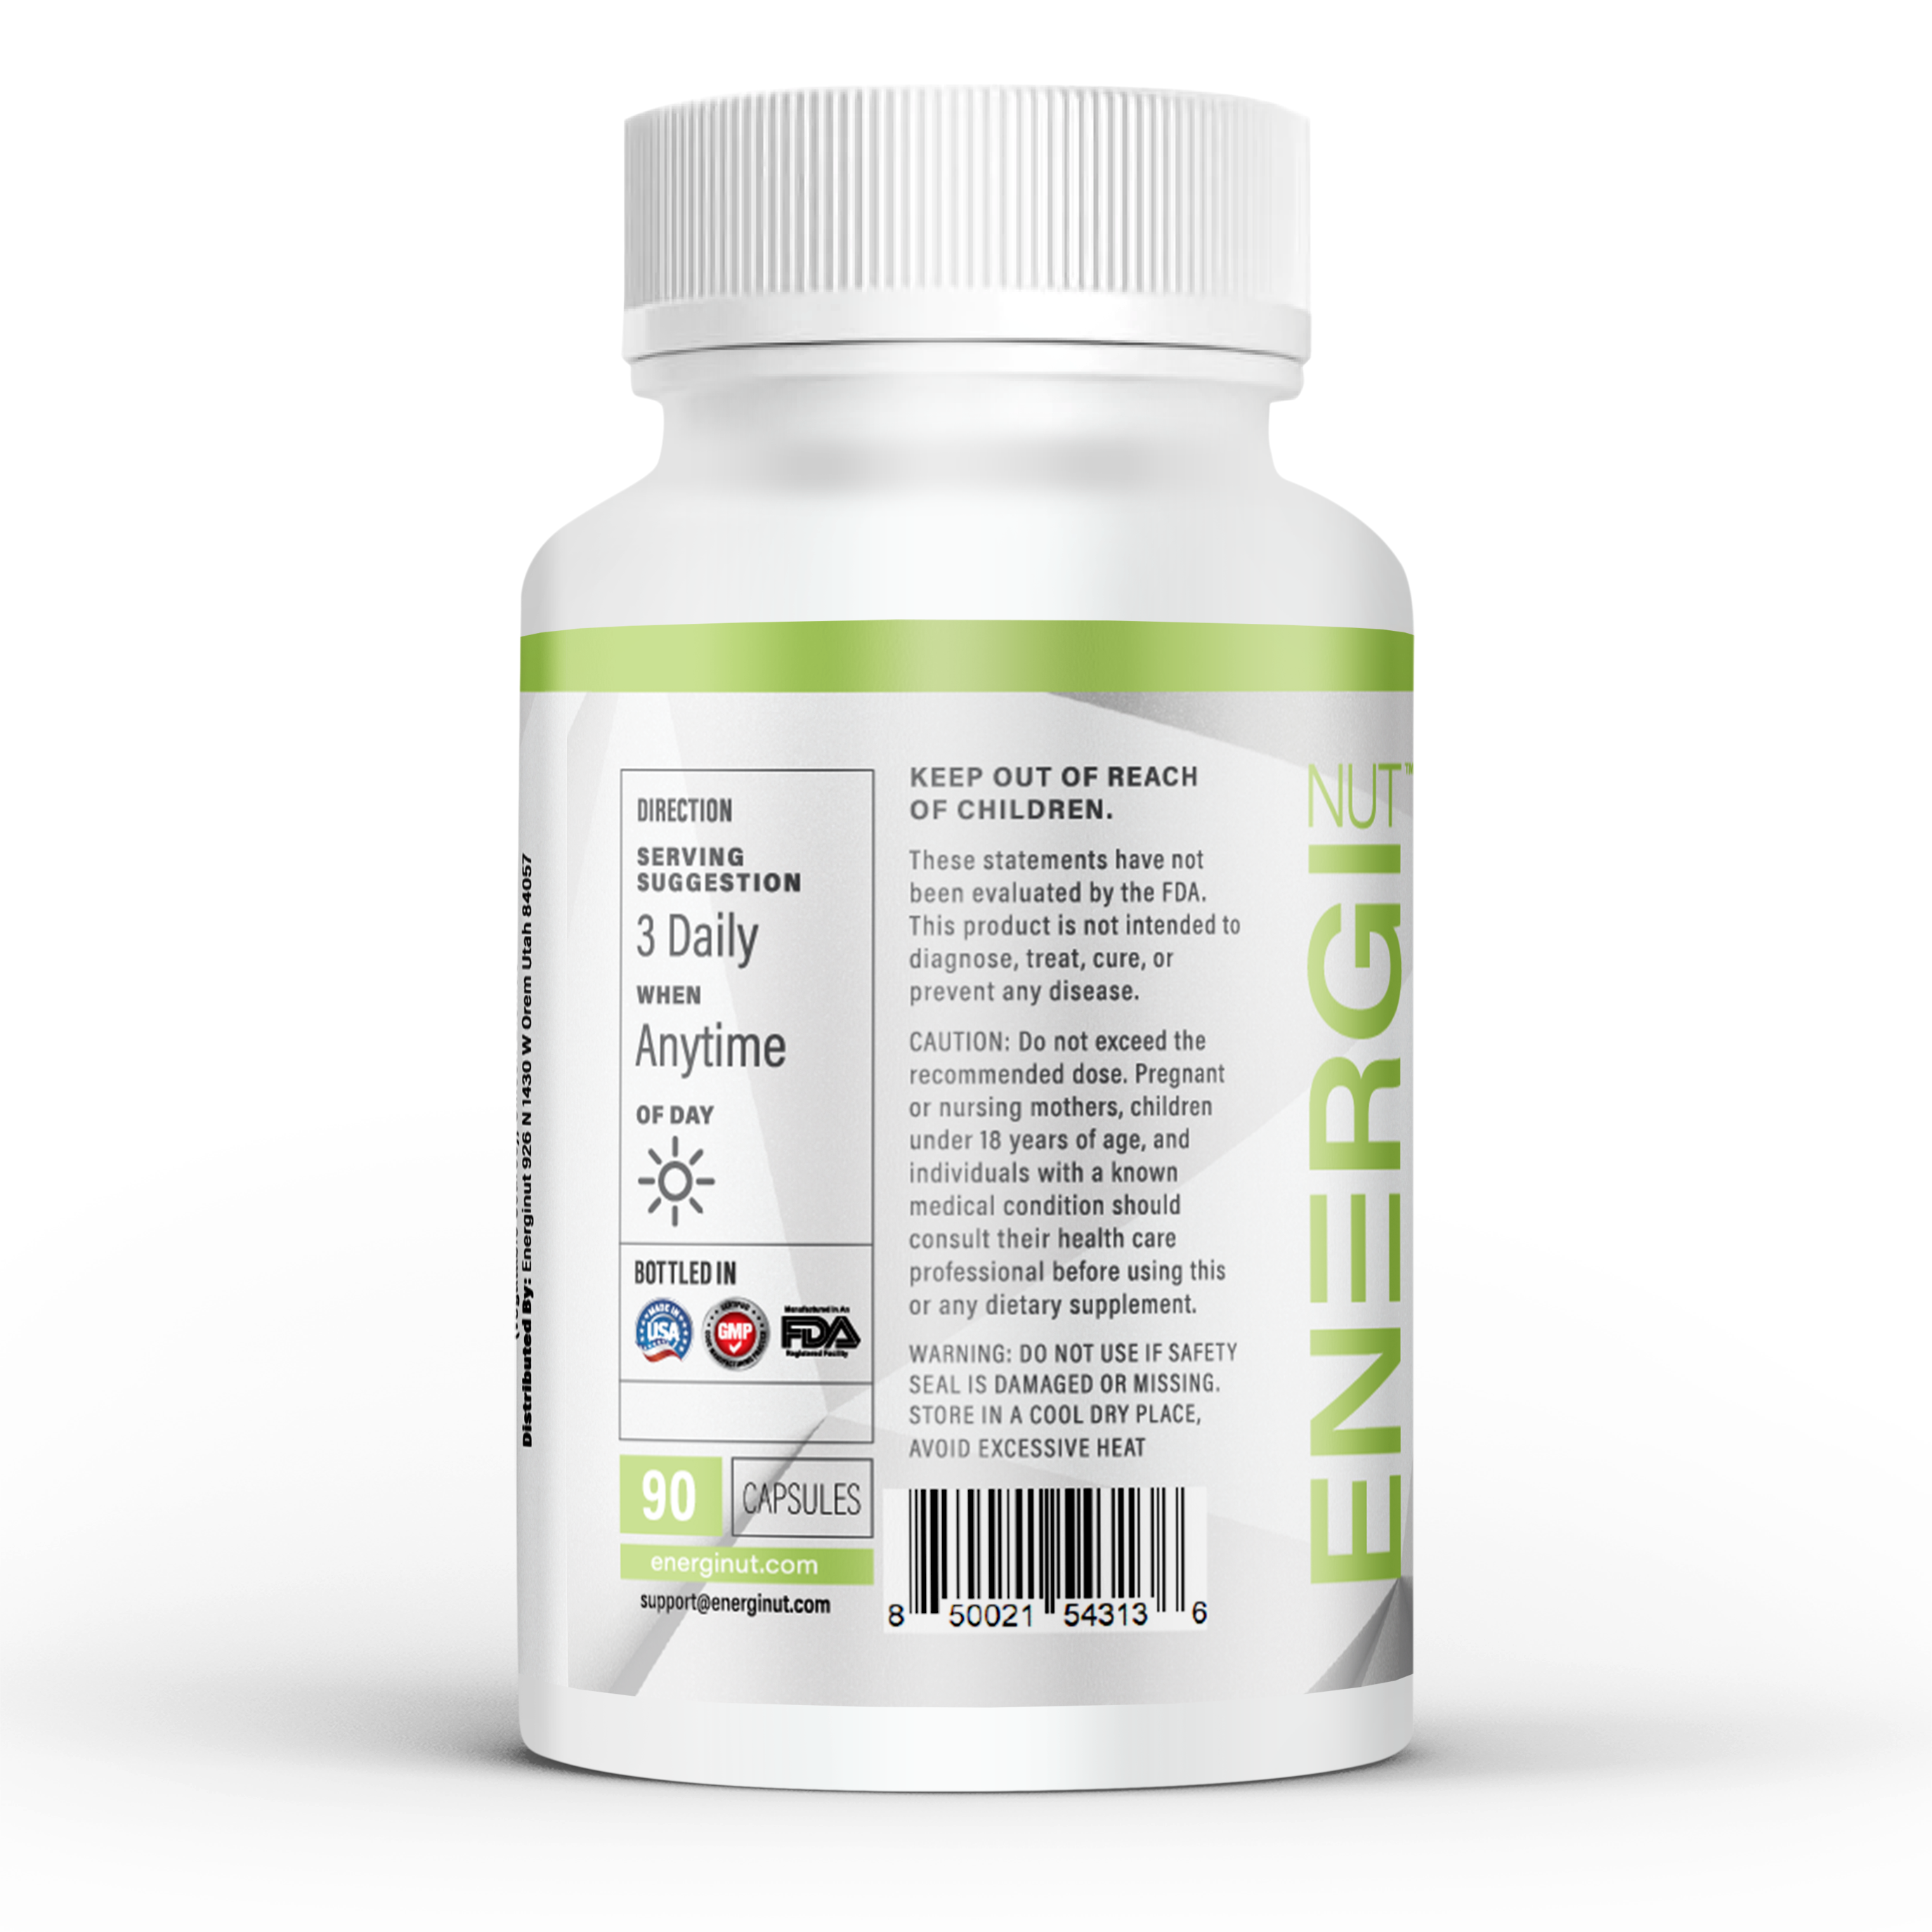 Cortisol Control Adrenal Blend